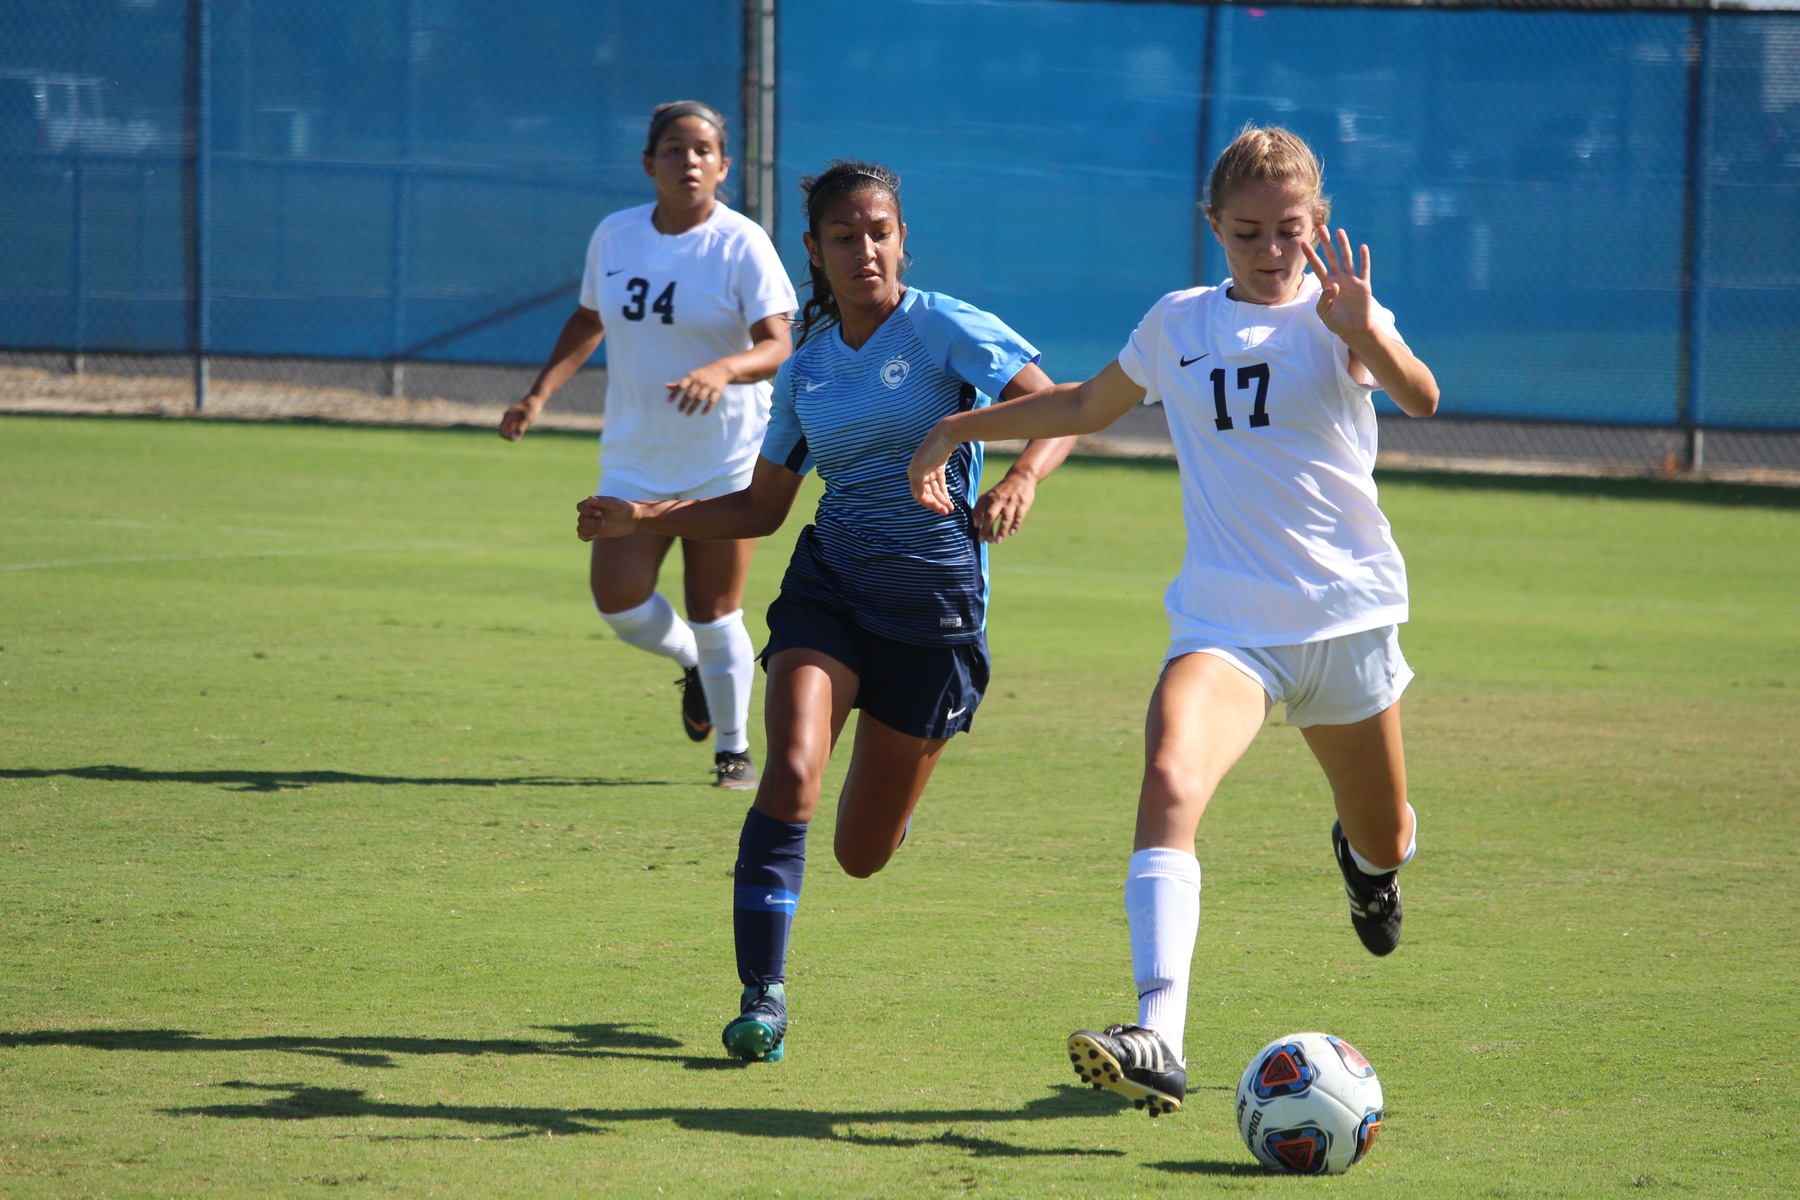 Lady Chargers Knock Off No. 10 Fullerton, 3-0